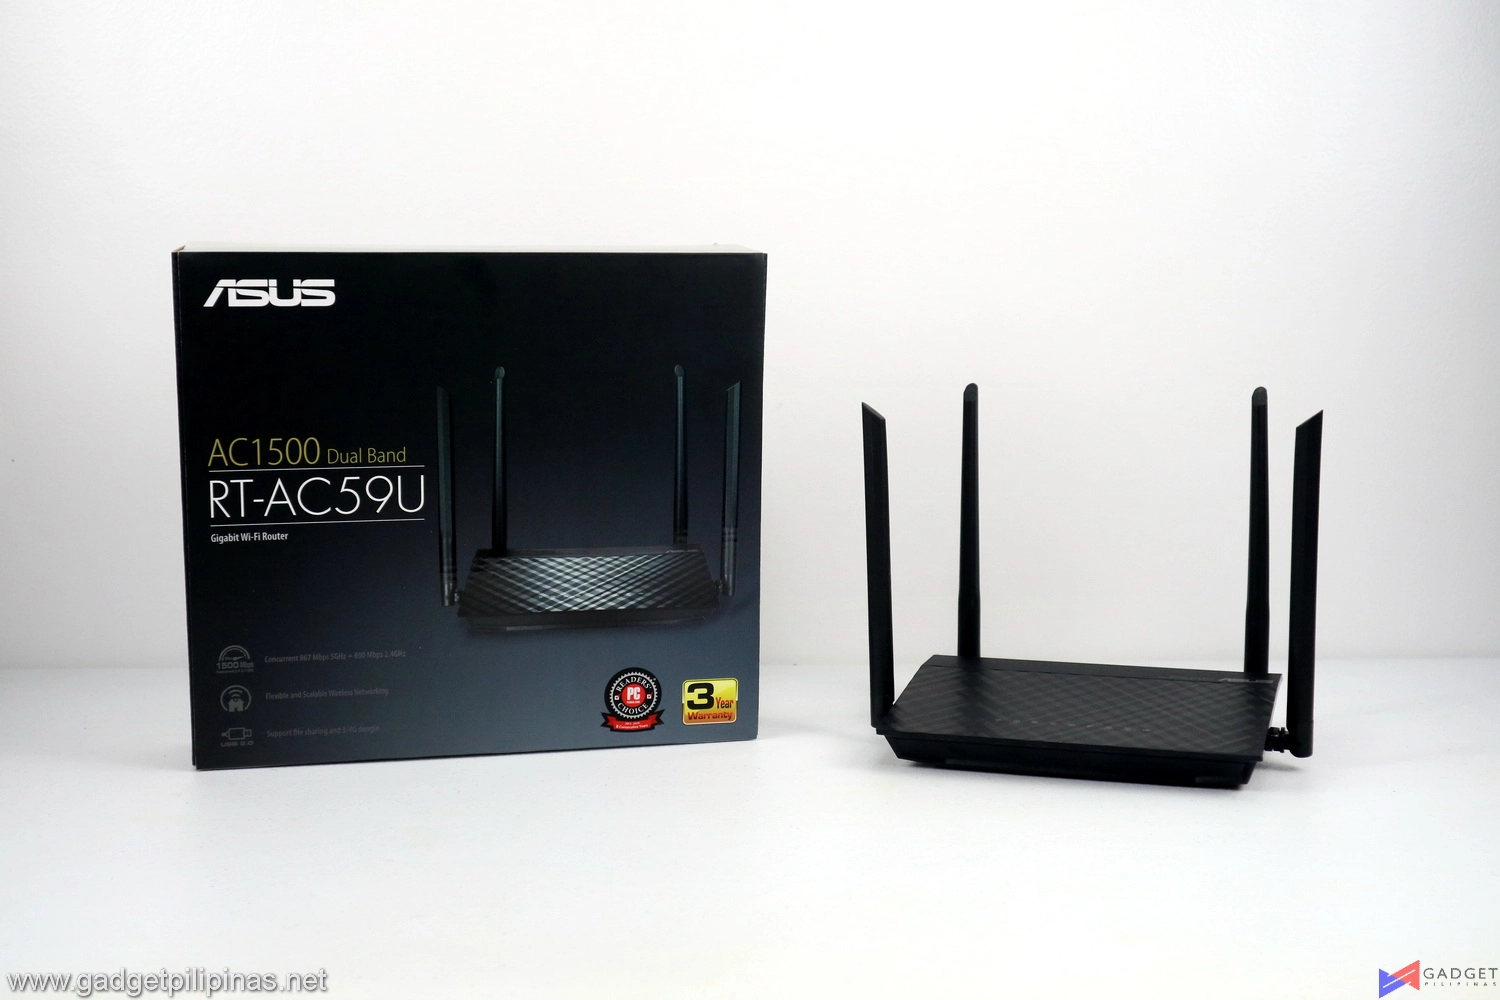 ASUS RT-AC59U V2 Router Review – A Great Value Router and AiMesh Node